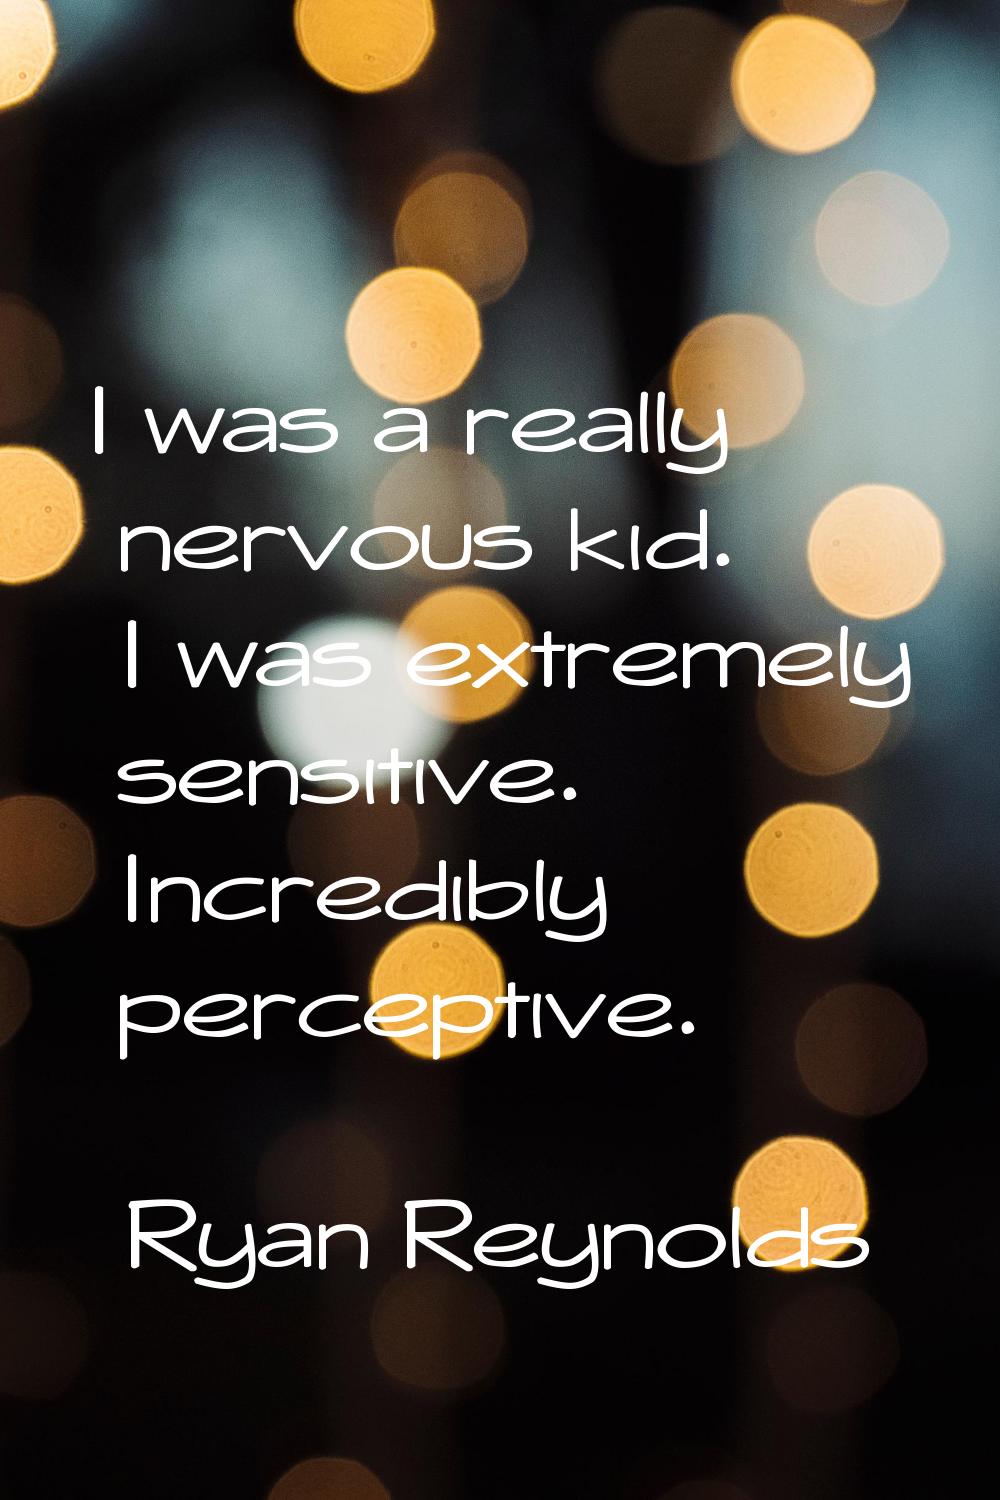 I was a really nervous kid. I was extremely sensitive. Incredibly perceptive.